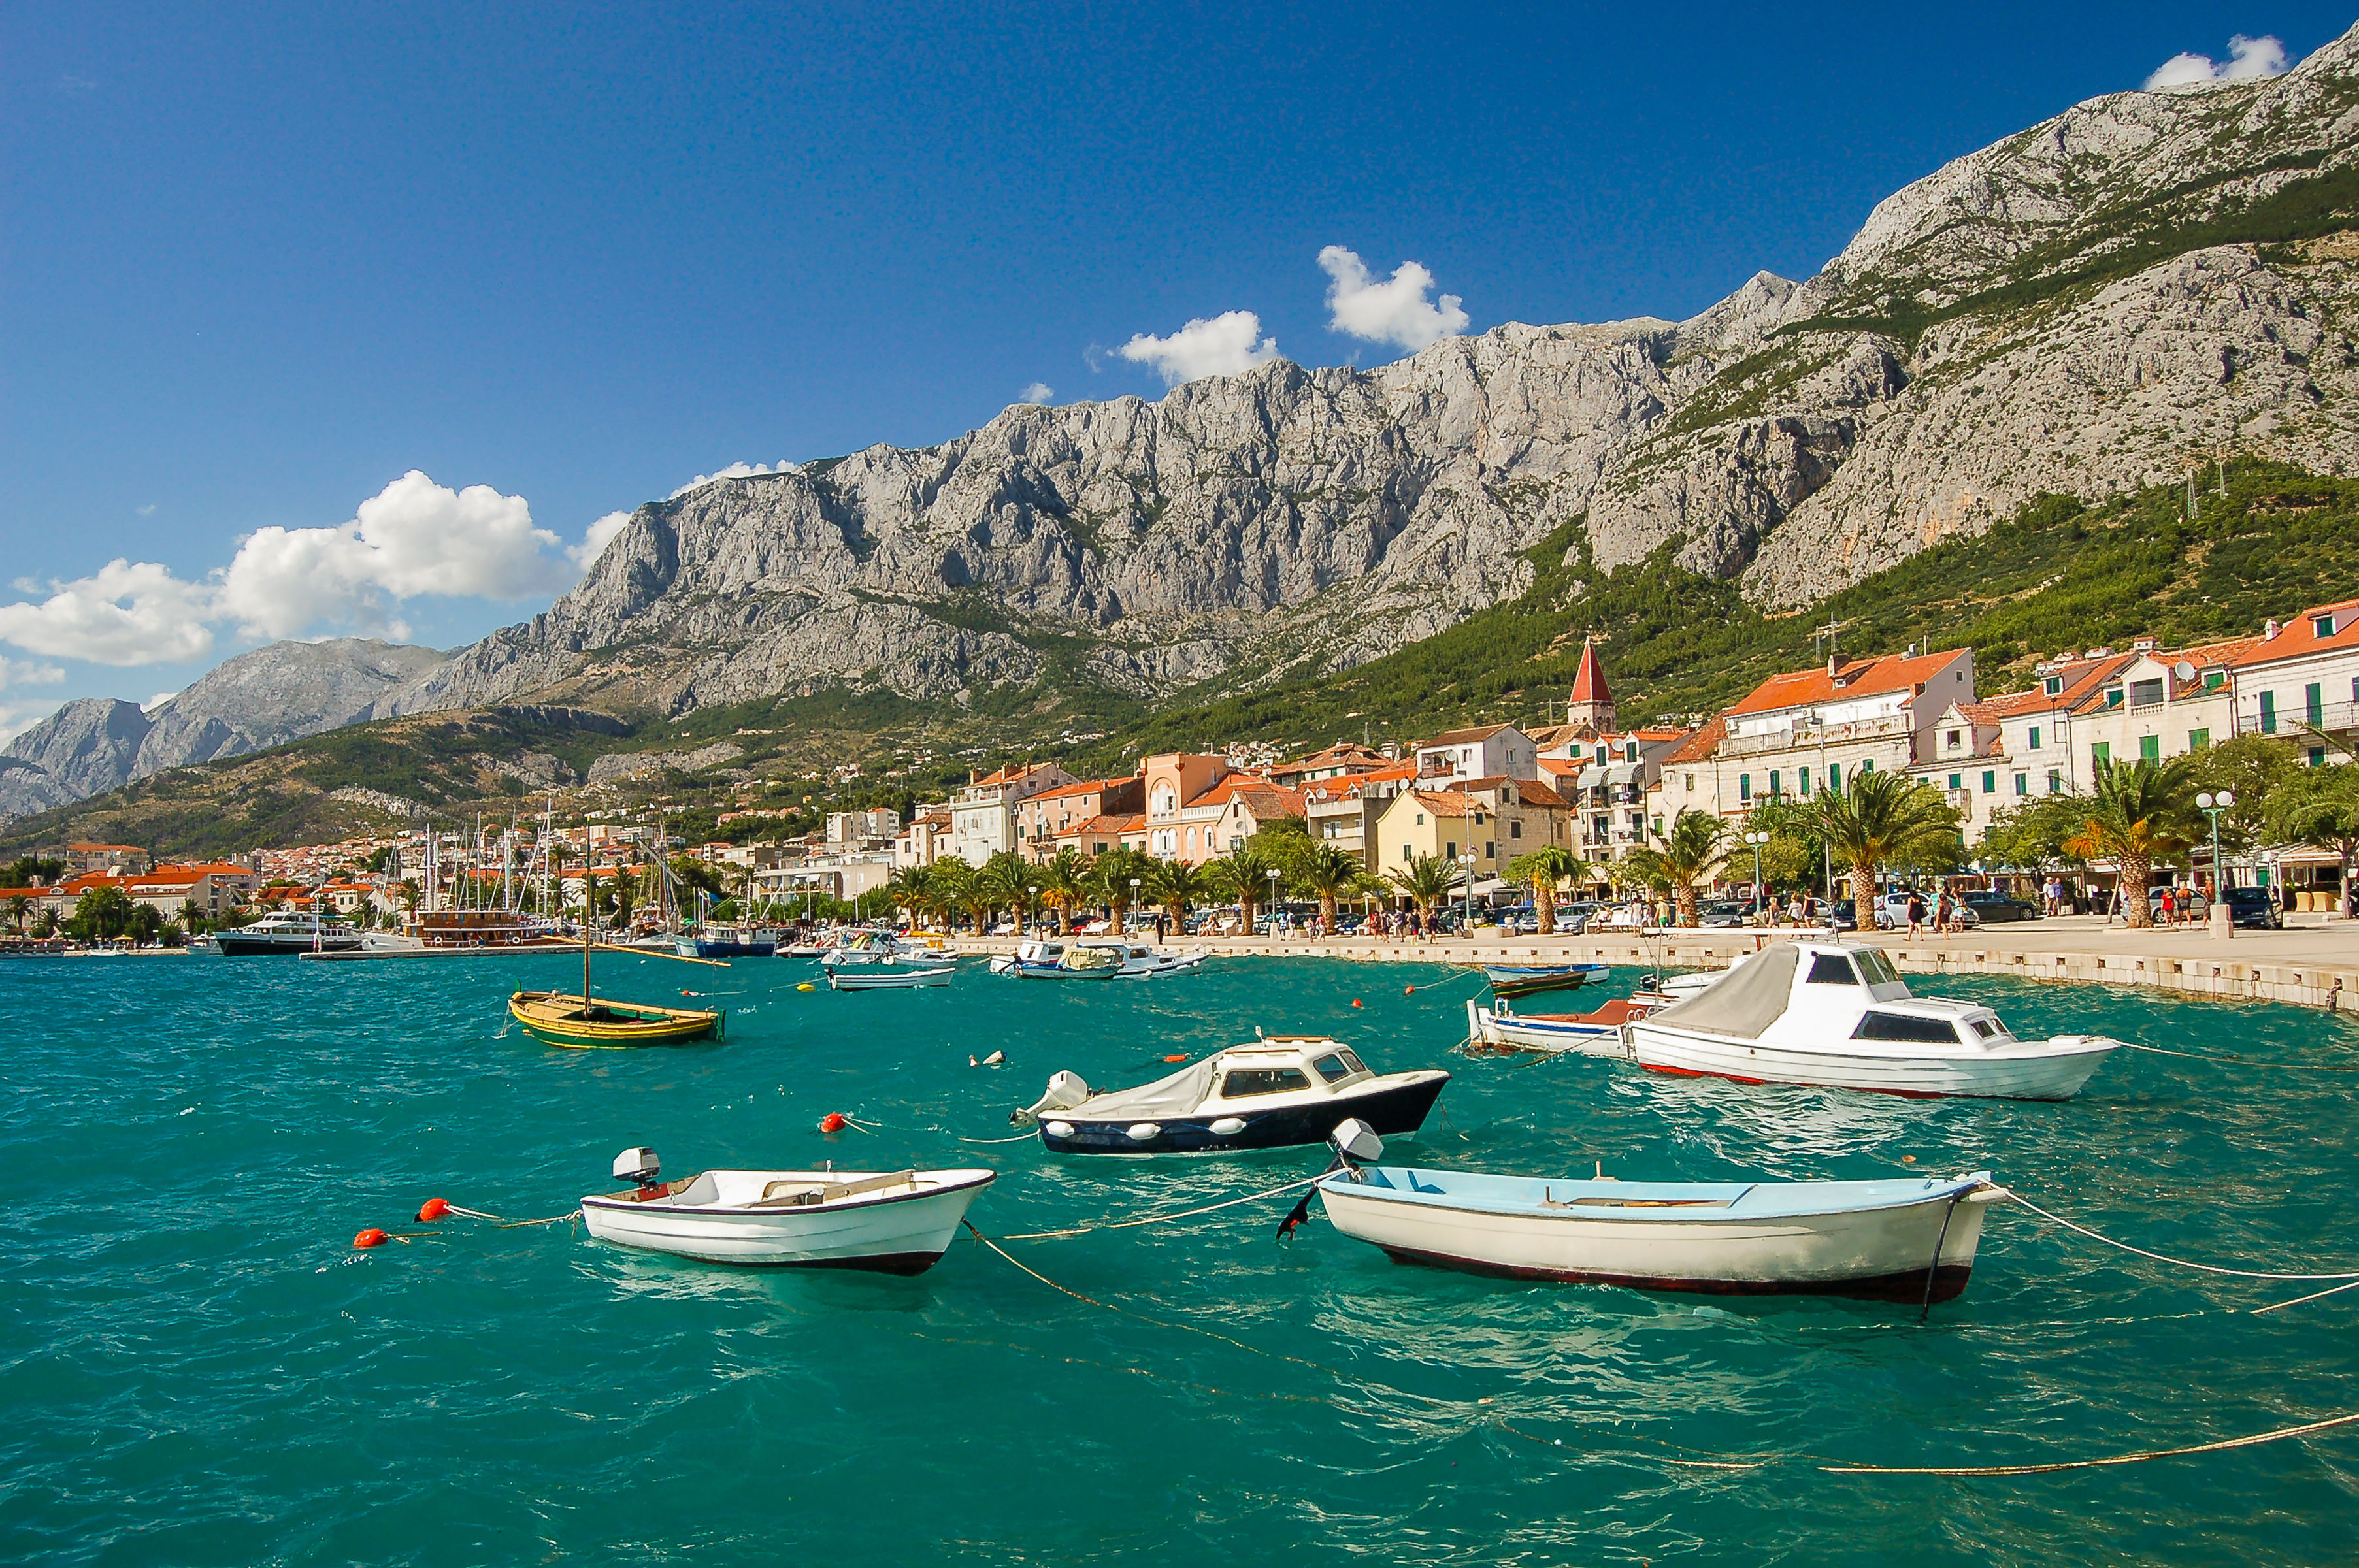 Boats in the water, under the mountain backdrop of Makarska